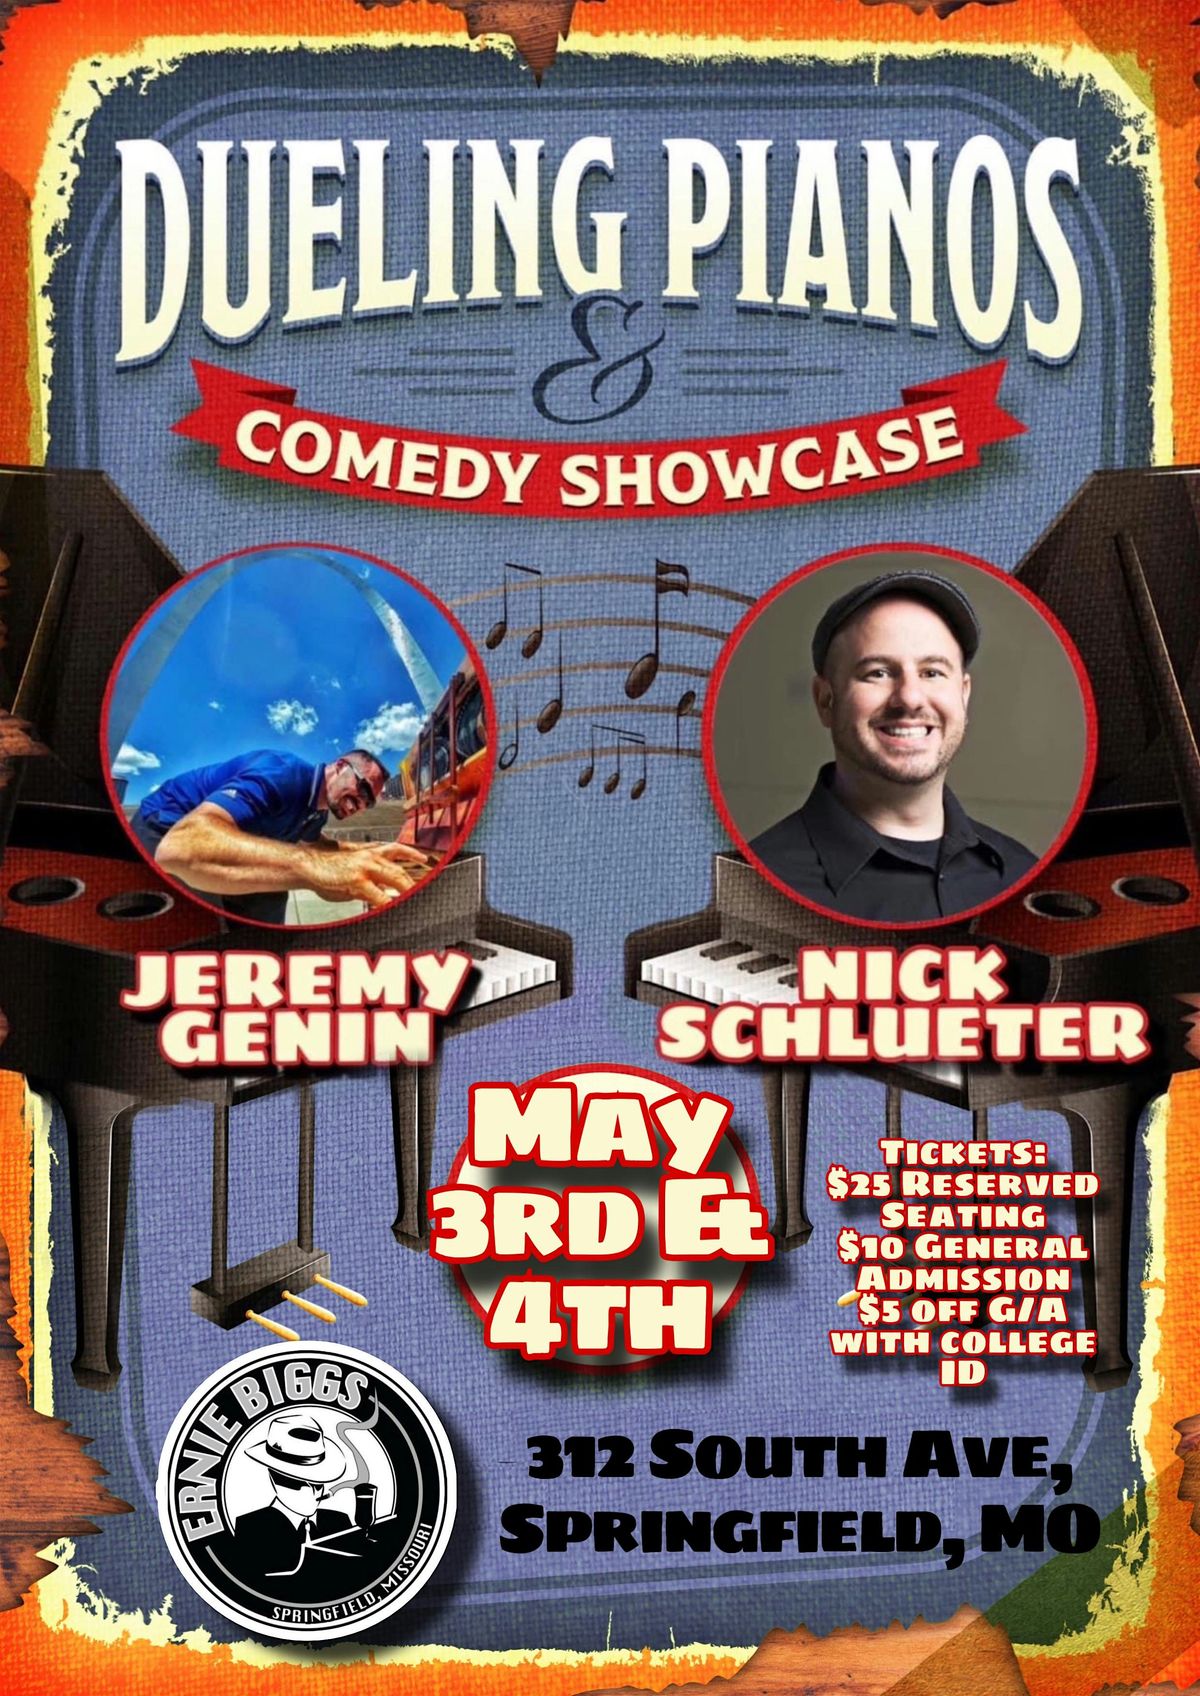 Dueling Piano and Comedy Showcase Saturday